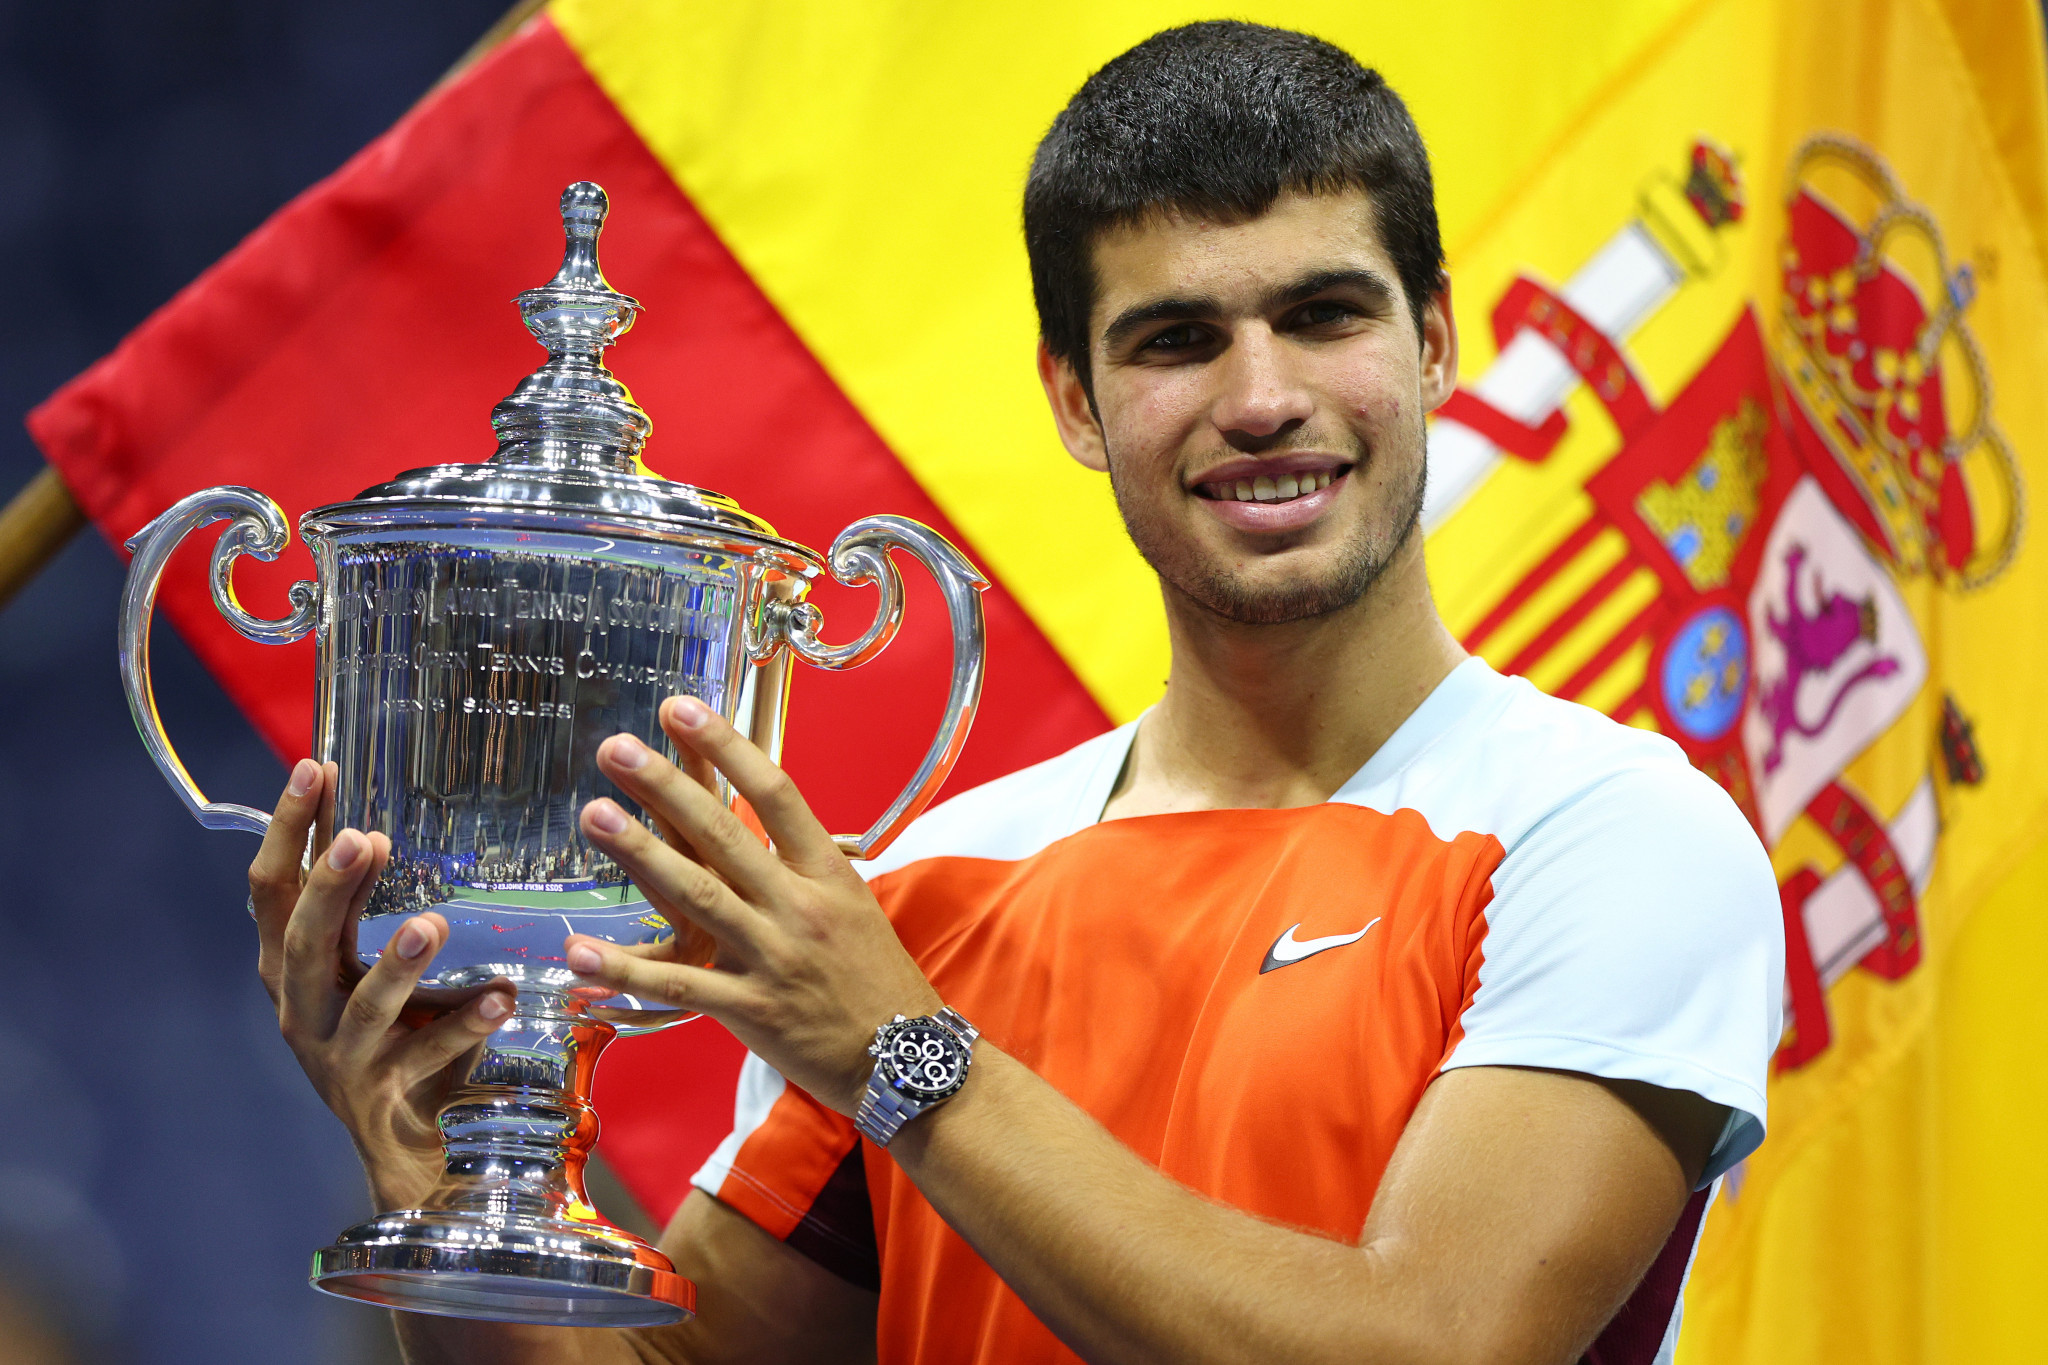 Alcaraz becomes world number one after winning US Open men’s singles title